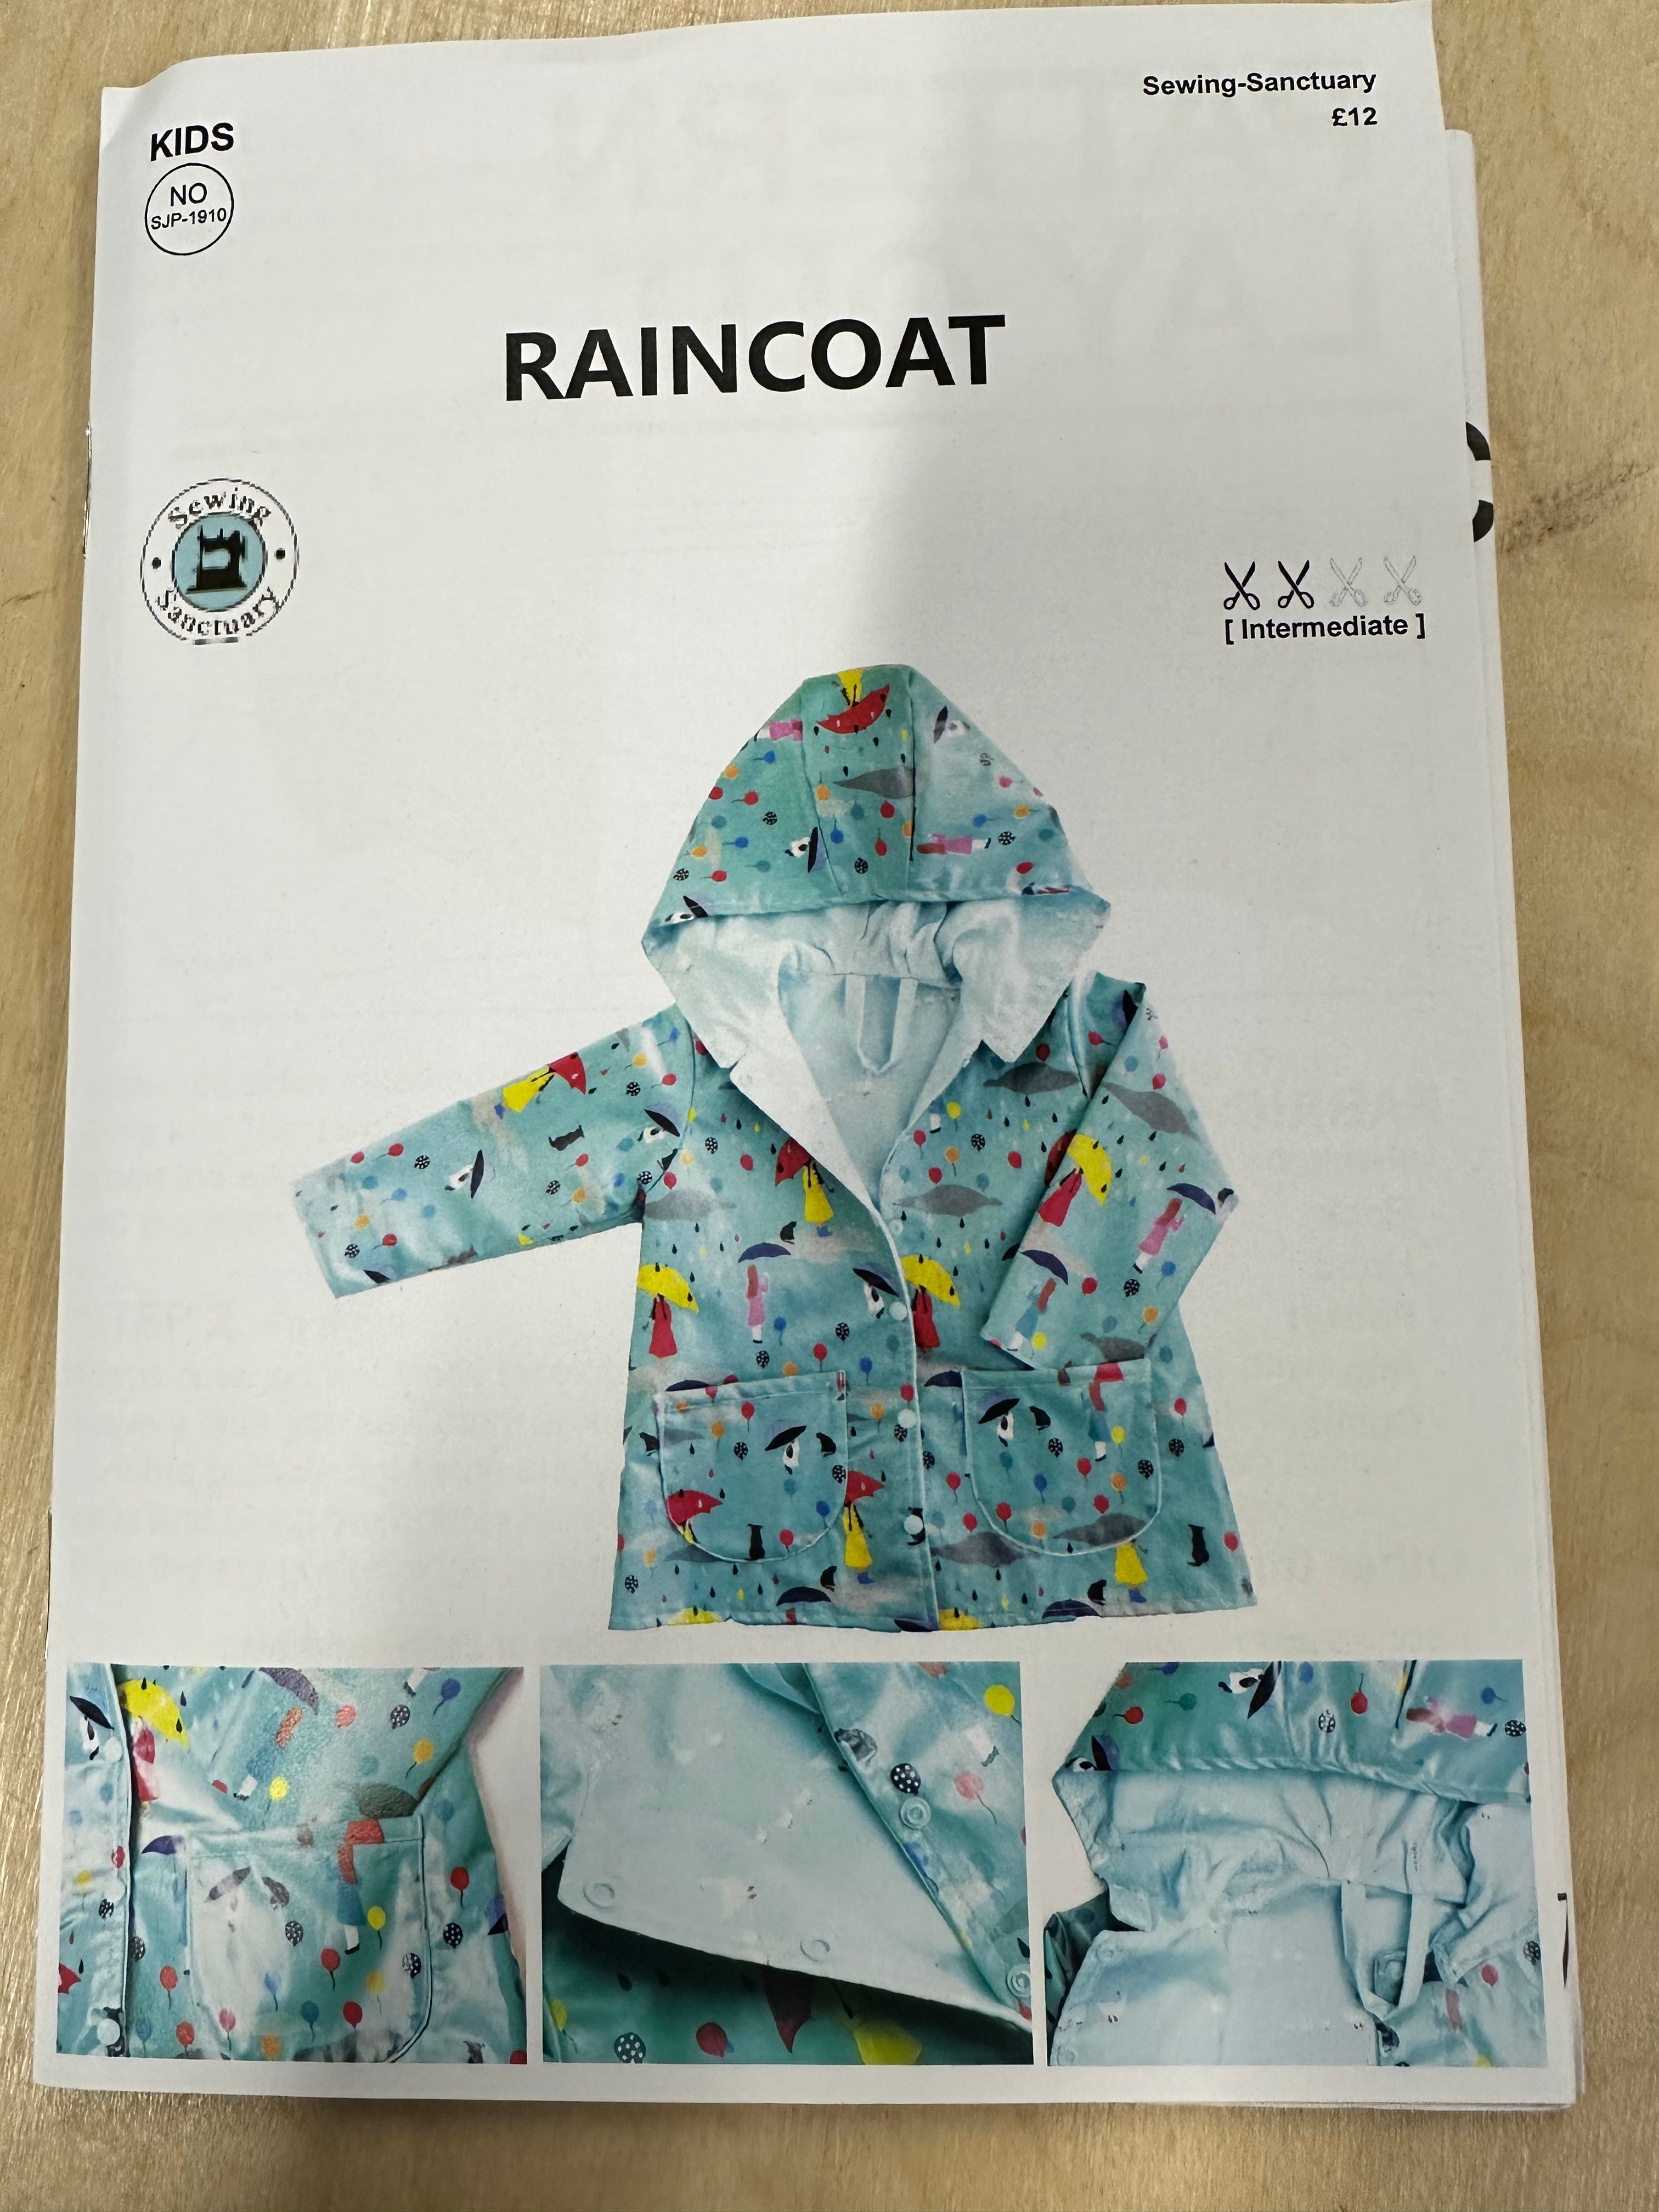 Raincoat by Sewing Sanctuary Children’s sewing pattern